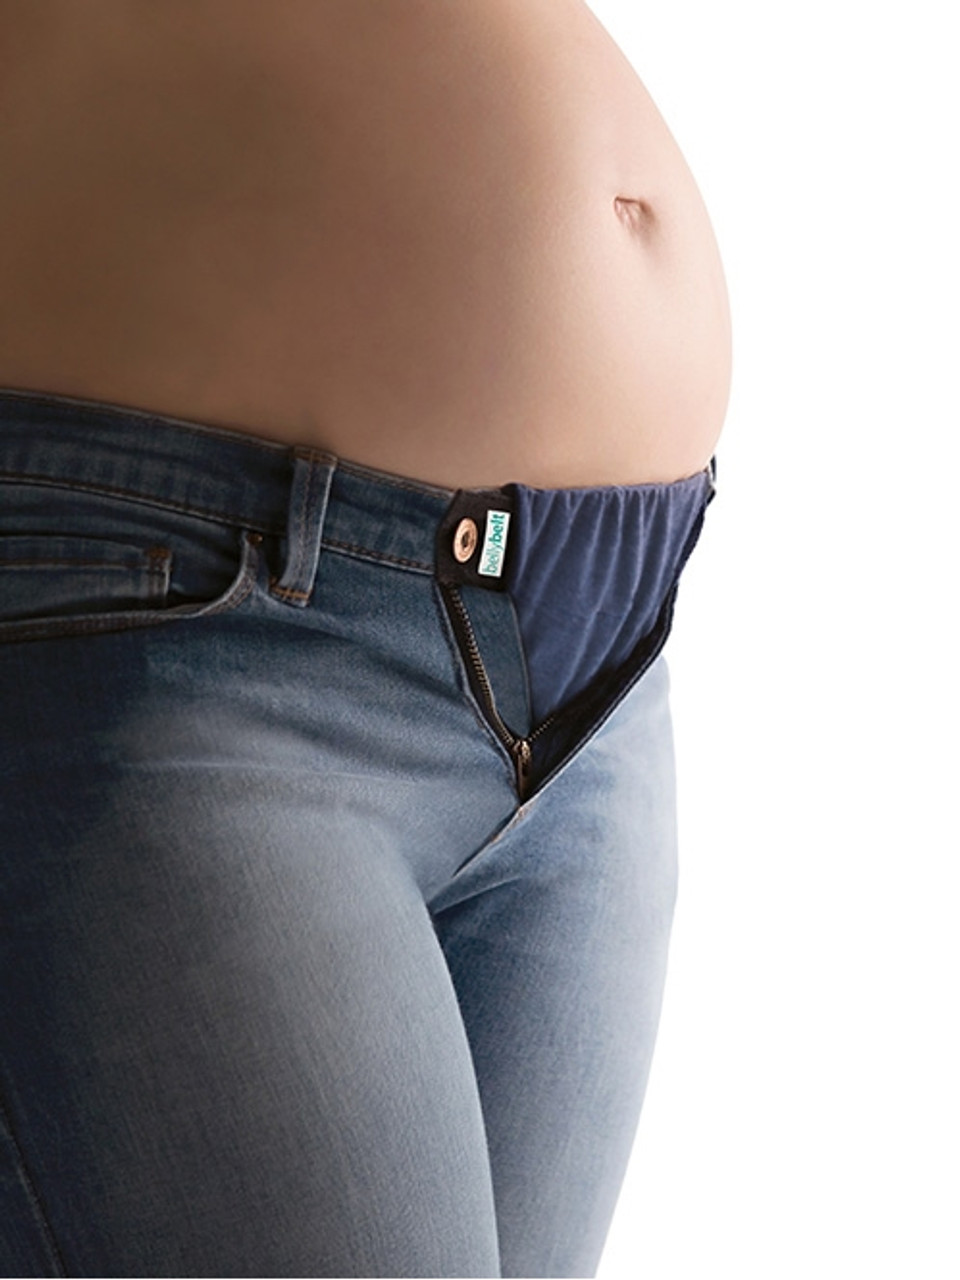 How to Wear a Pregnancy Belly Band - The Pregnancy Nurse